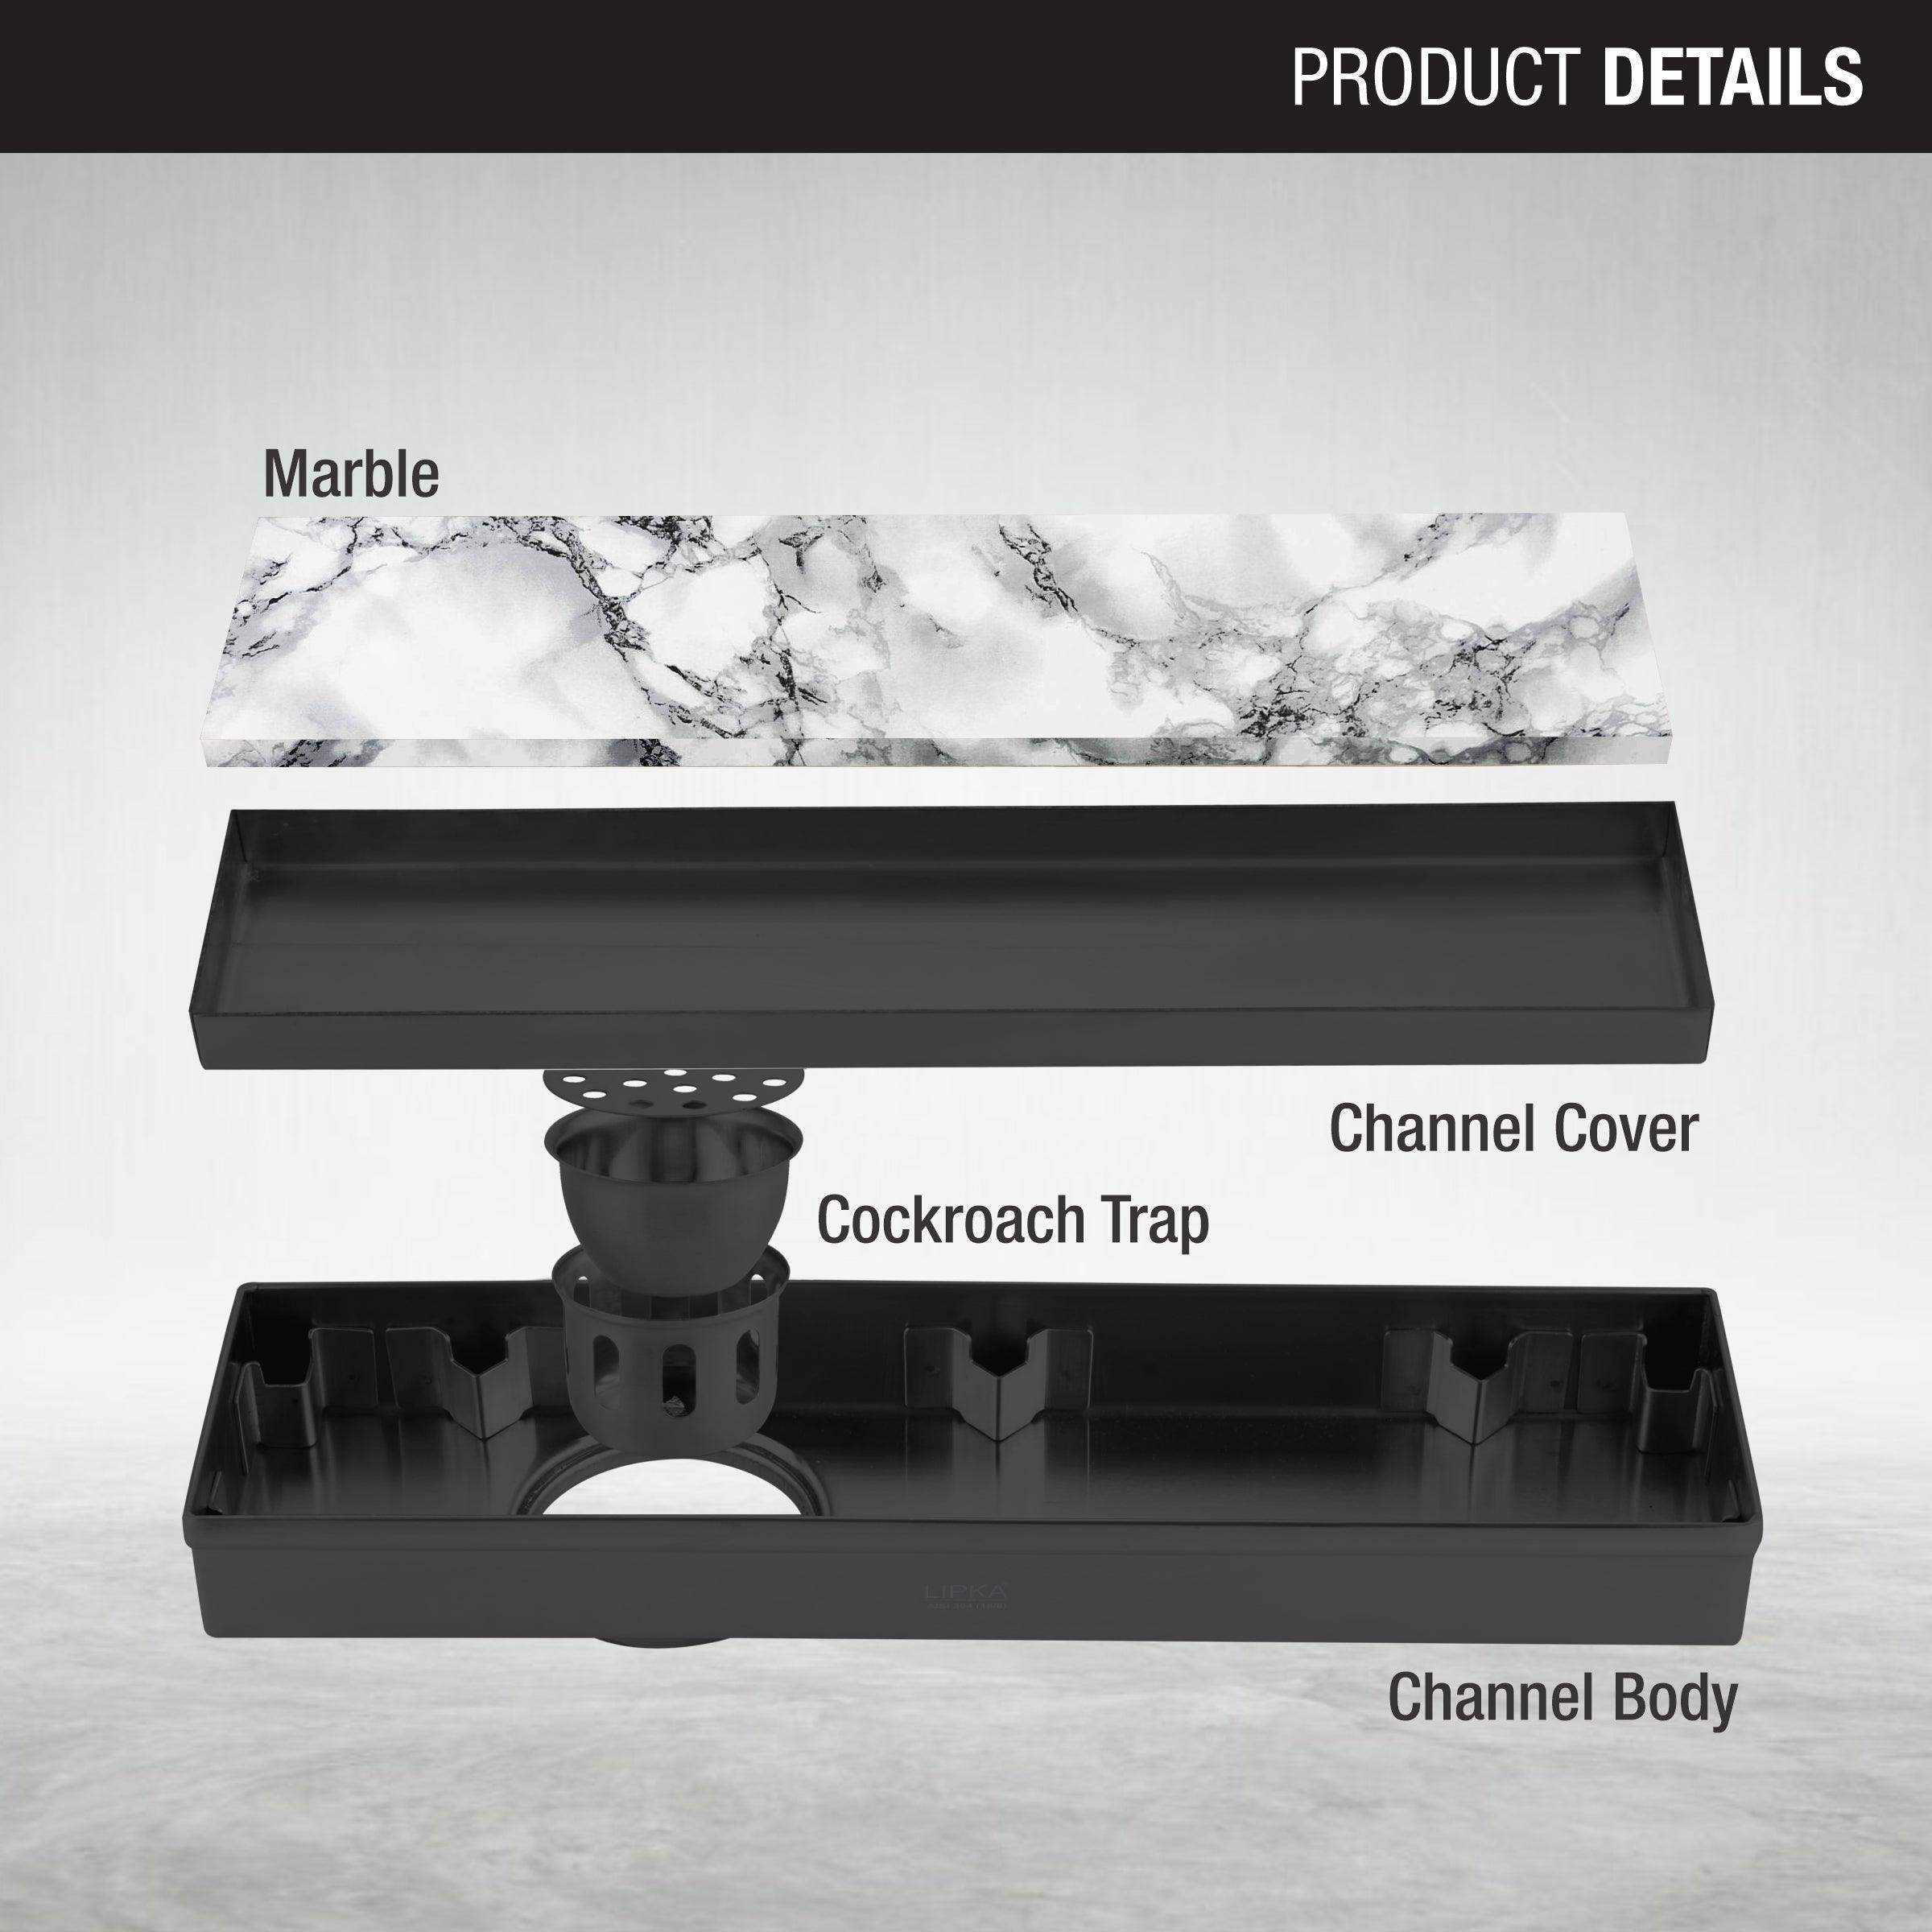 Marble Insert Shower Drain Channel - Black (24 x 3 Inches) product part